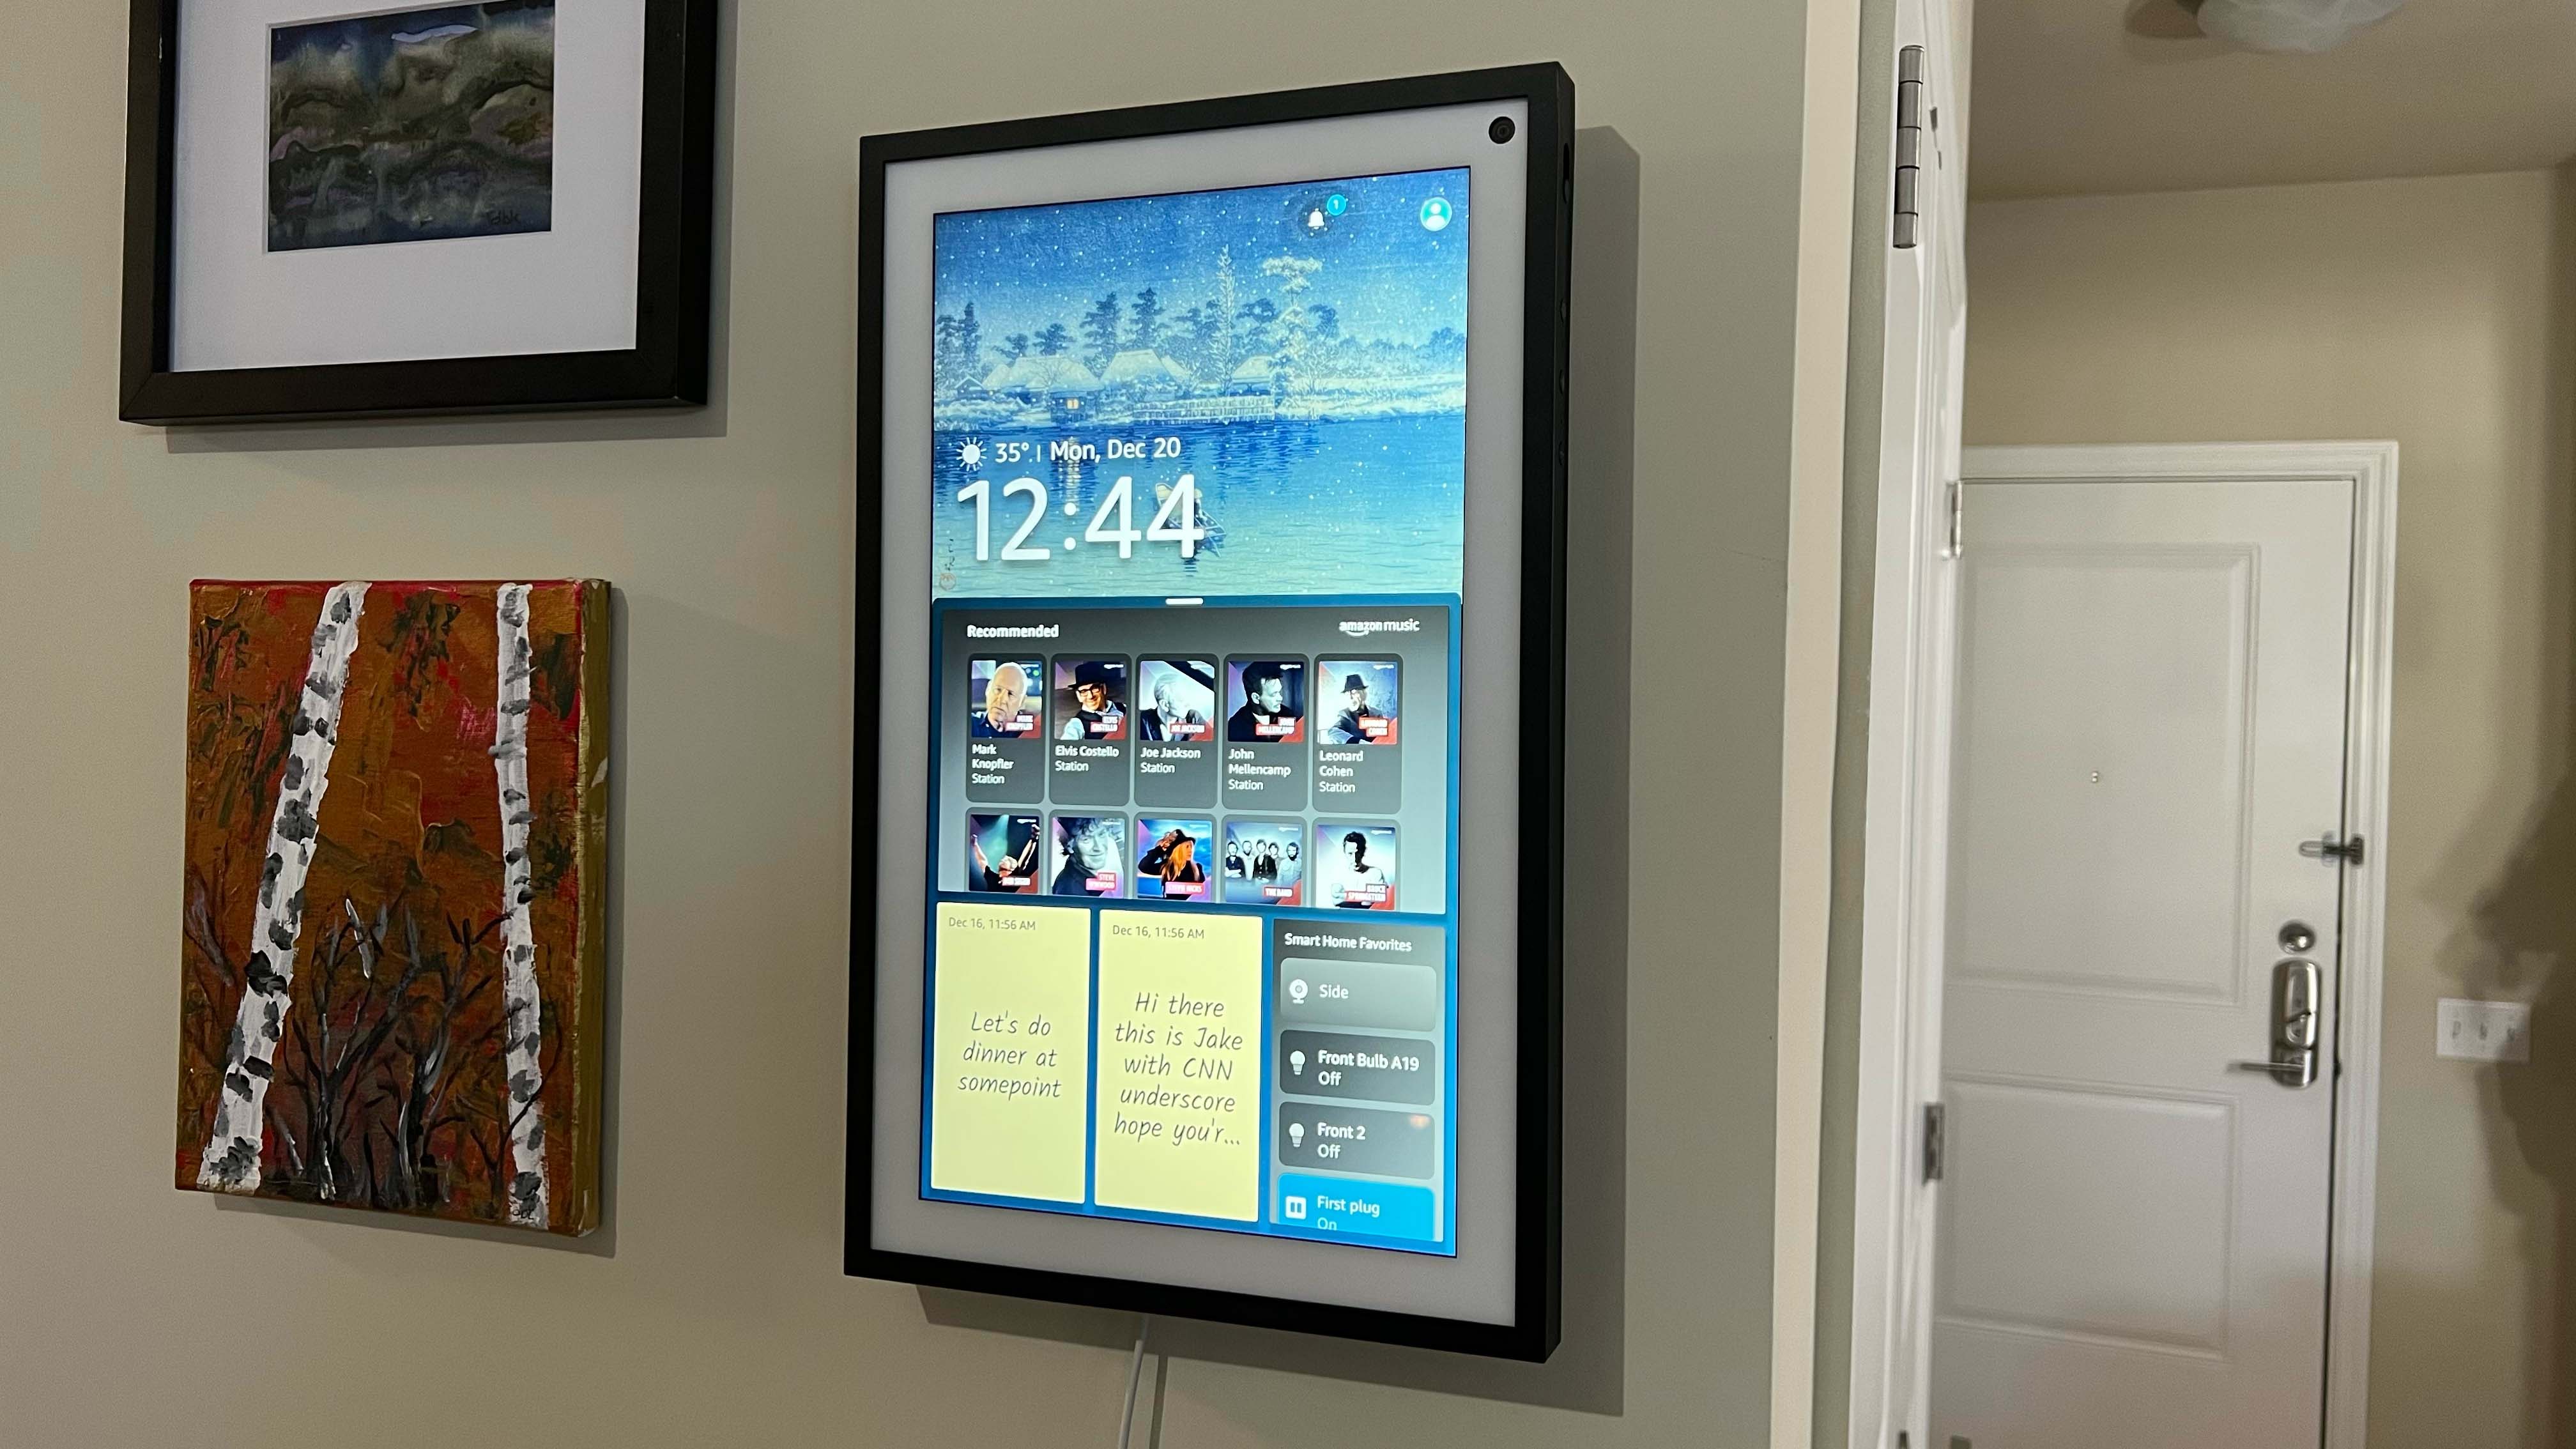  Stand for Echo Show 15 Smart Display